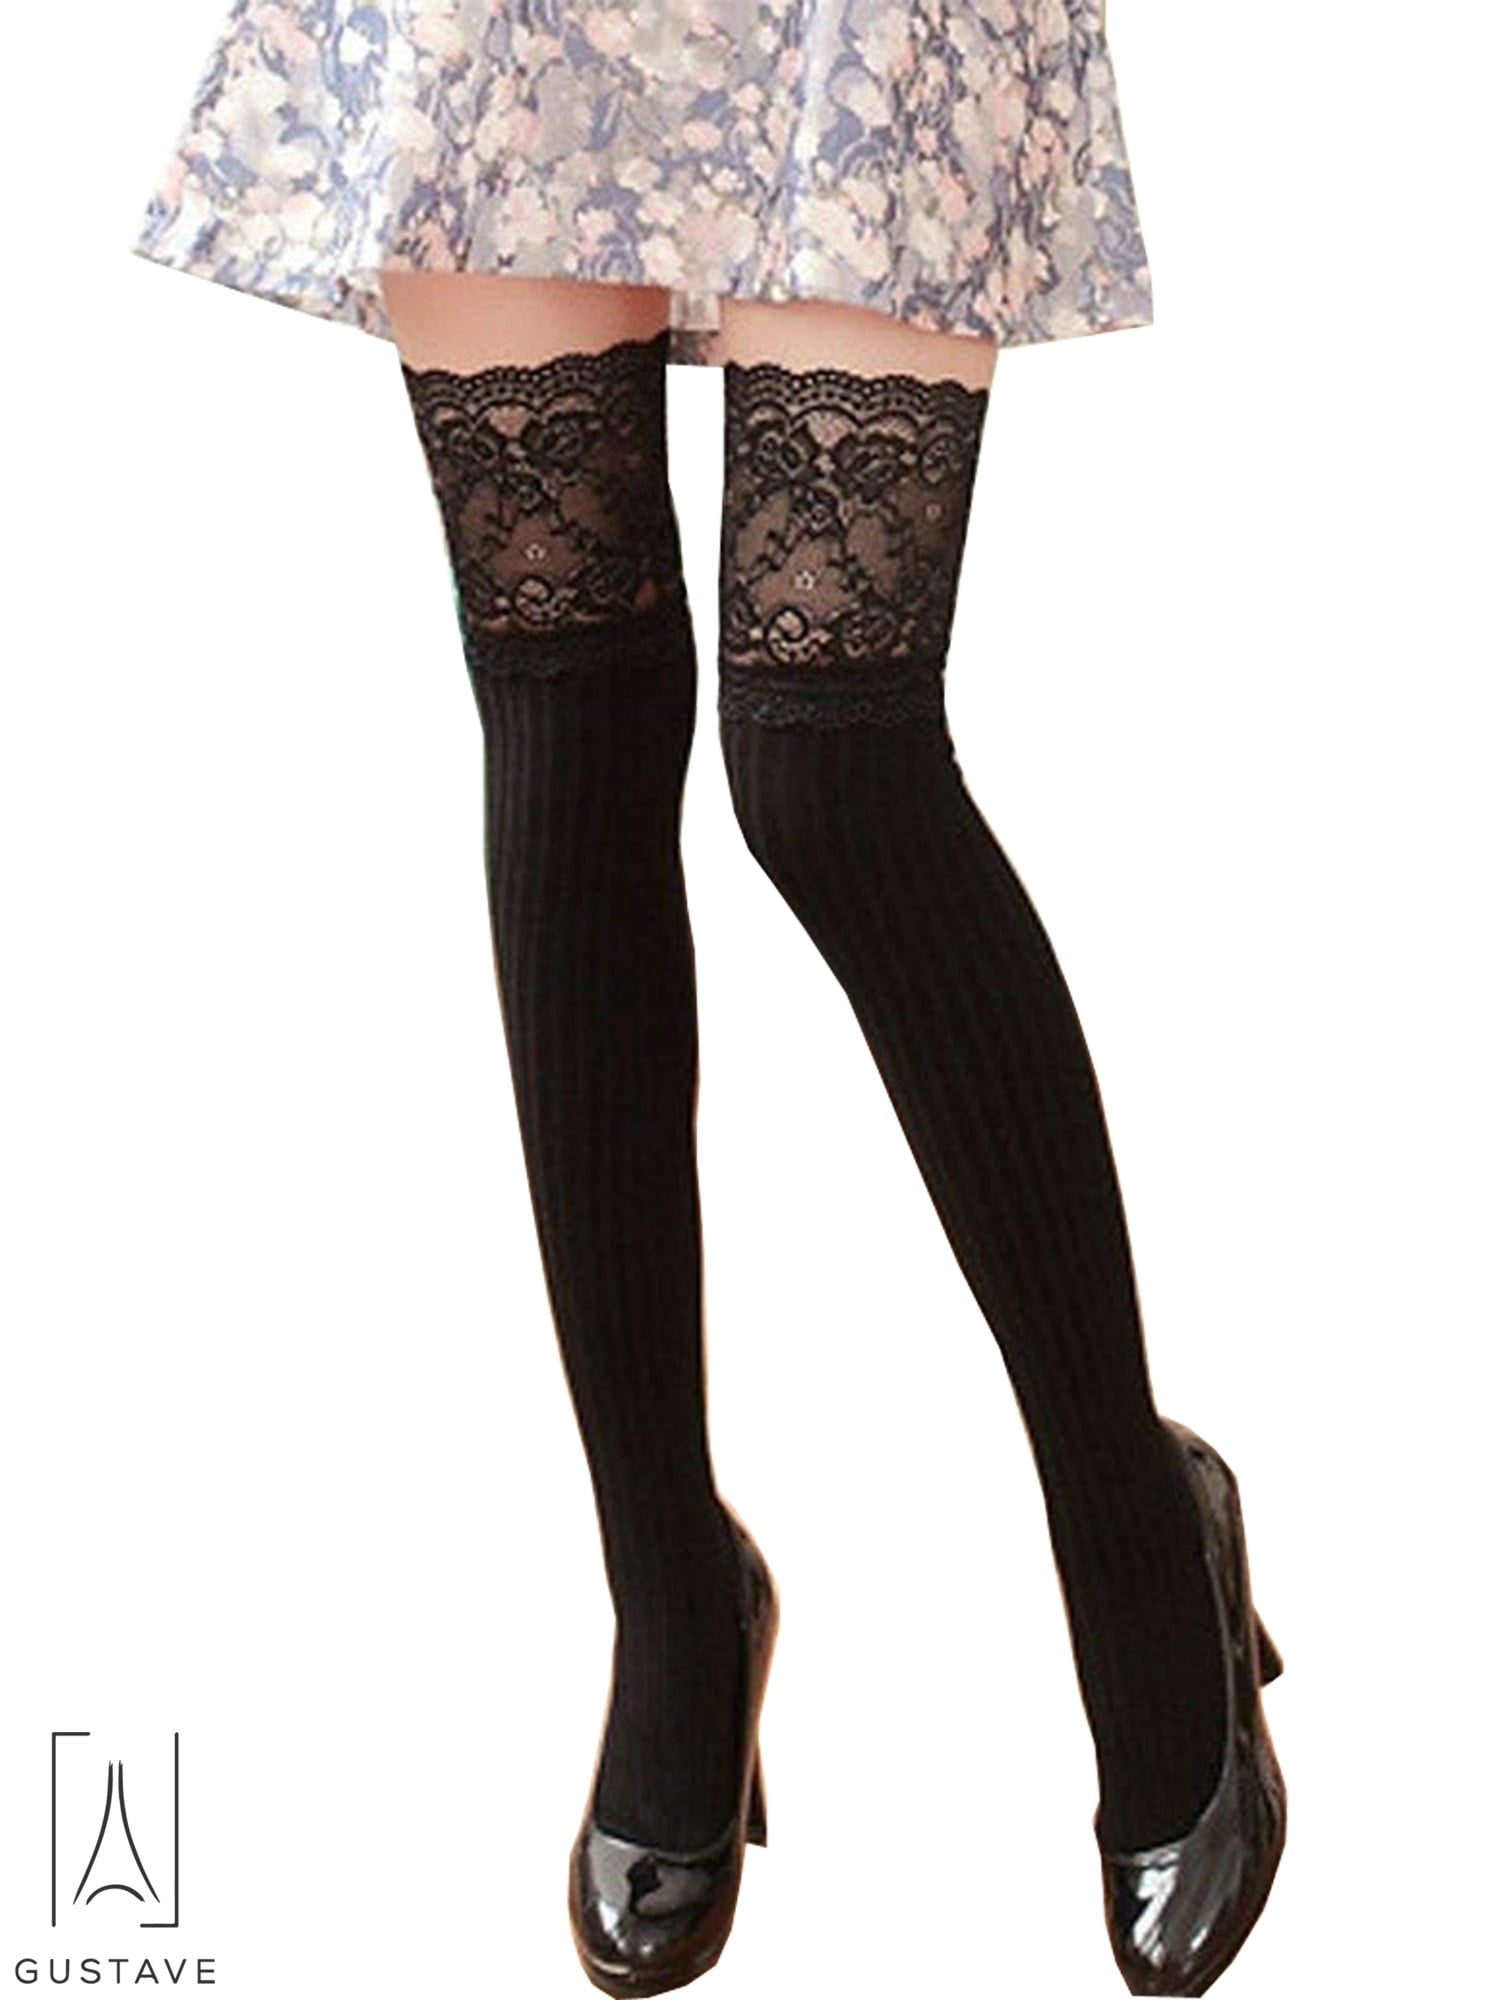 New Ladies Womens Over Knee Long Casual Ladies Thigh High Plain Stretch Fit Cotton Overknee Socks